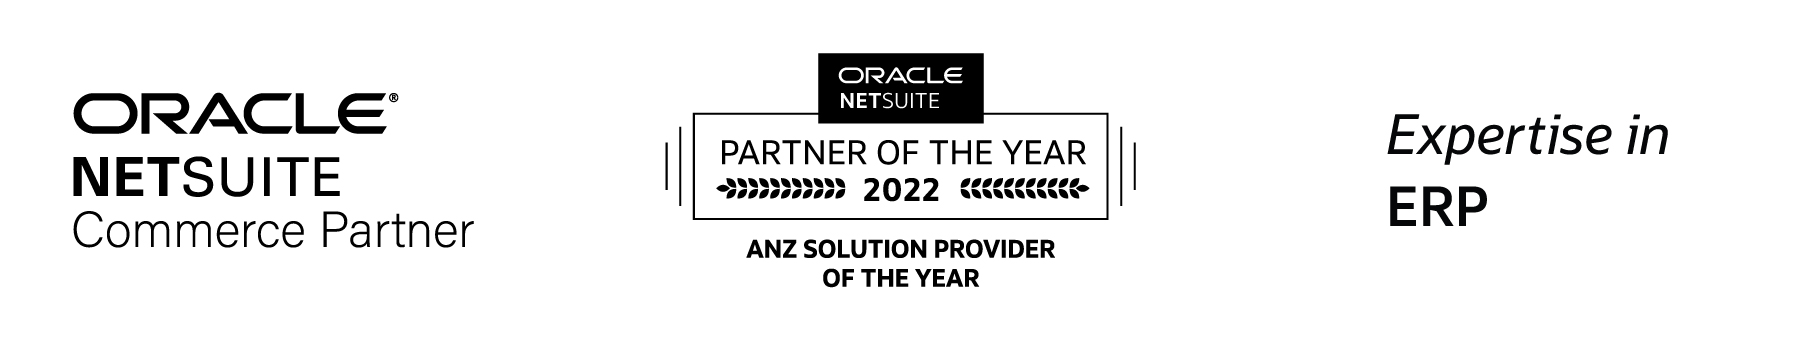 Oracle Netsuite Commerce Partner, Oracle Netsuite Partner of the Year Awards, Oracle Netsuite 5 Star Award, NetSuite Solution Provider Expertise in ERP